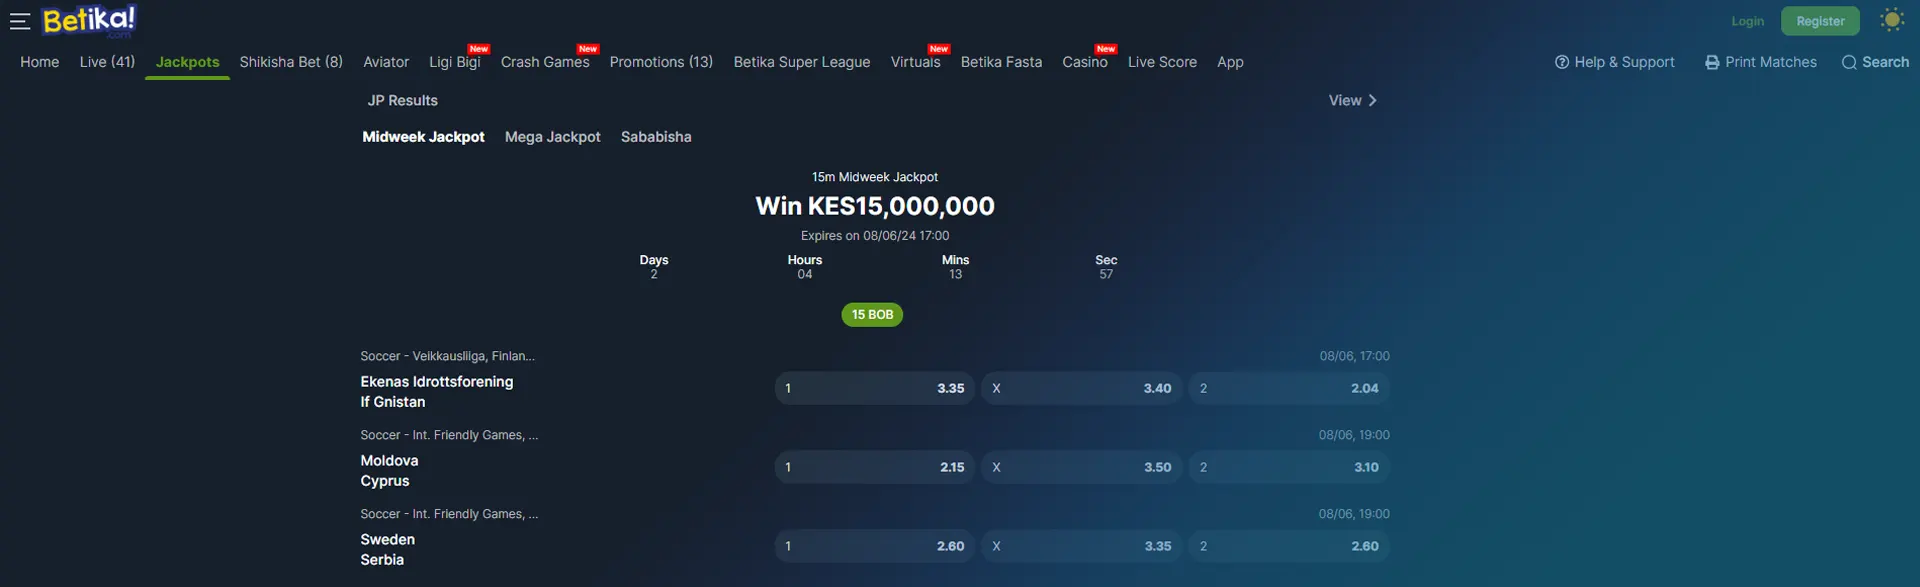 Jackpots overview on the Betika betting site.